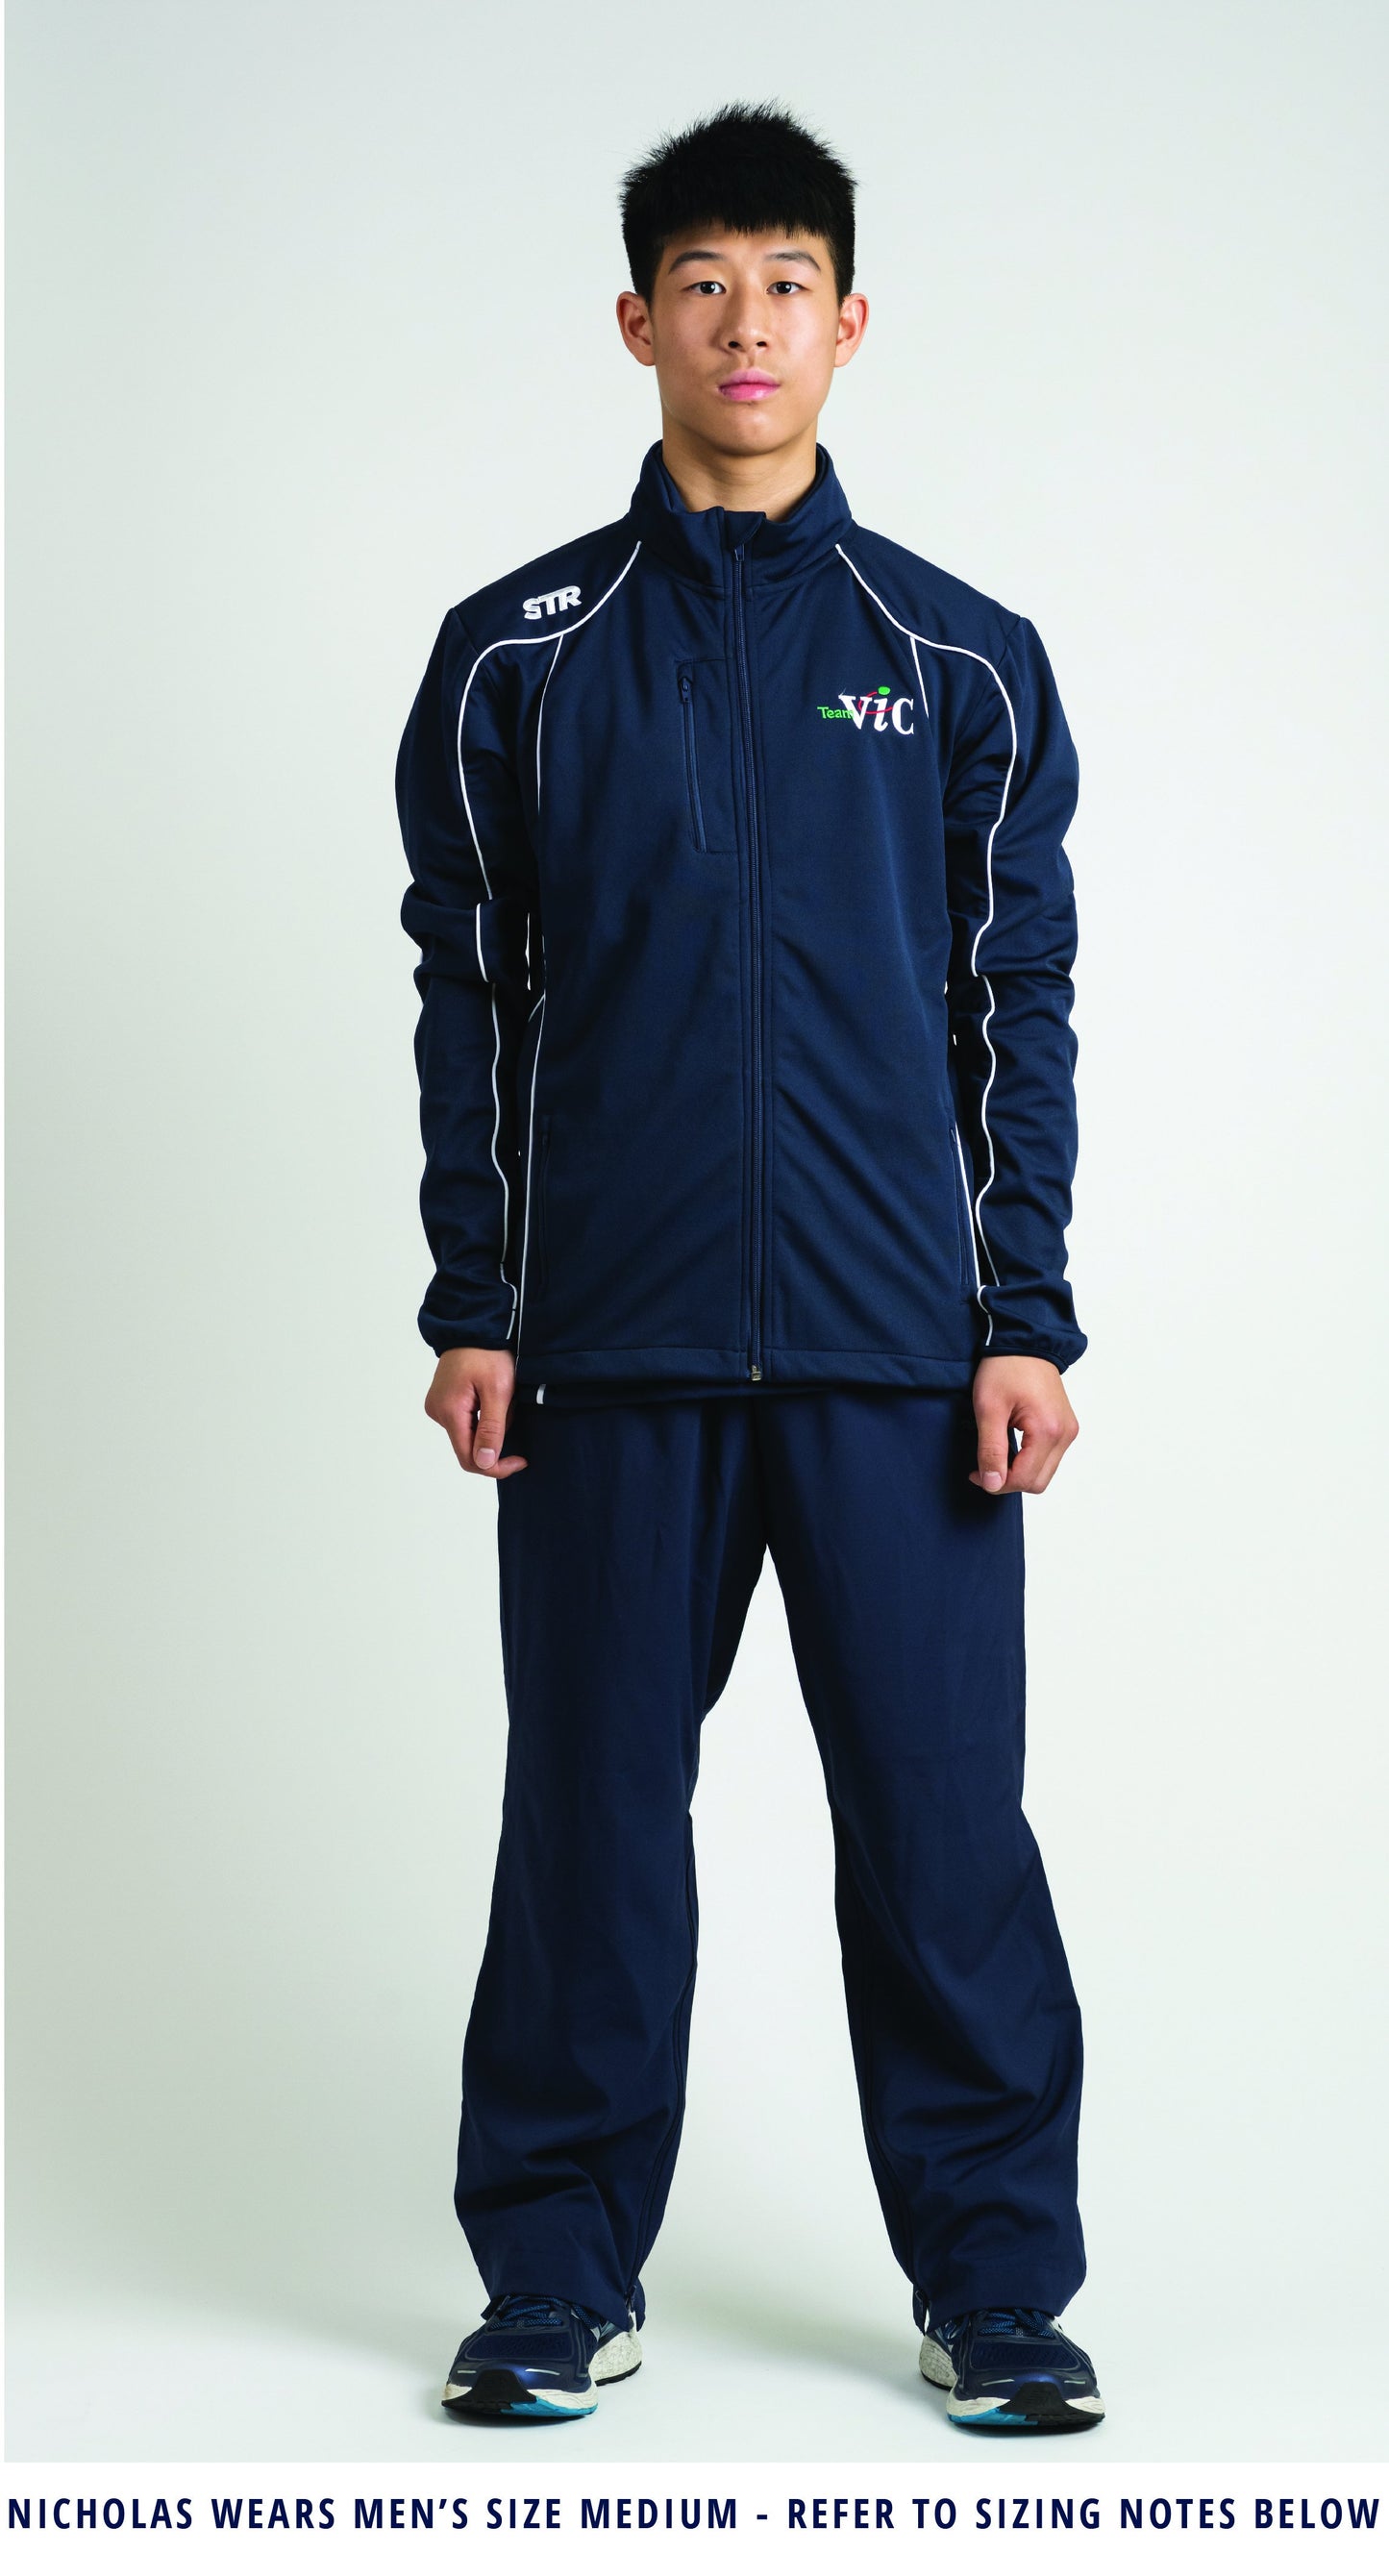 Male Team Vic Straight Leg Tracksuit Pants Tall (Walk Out)